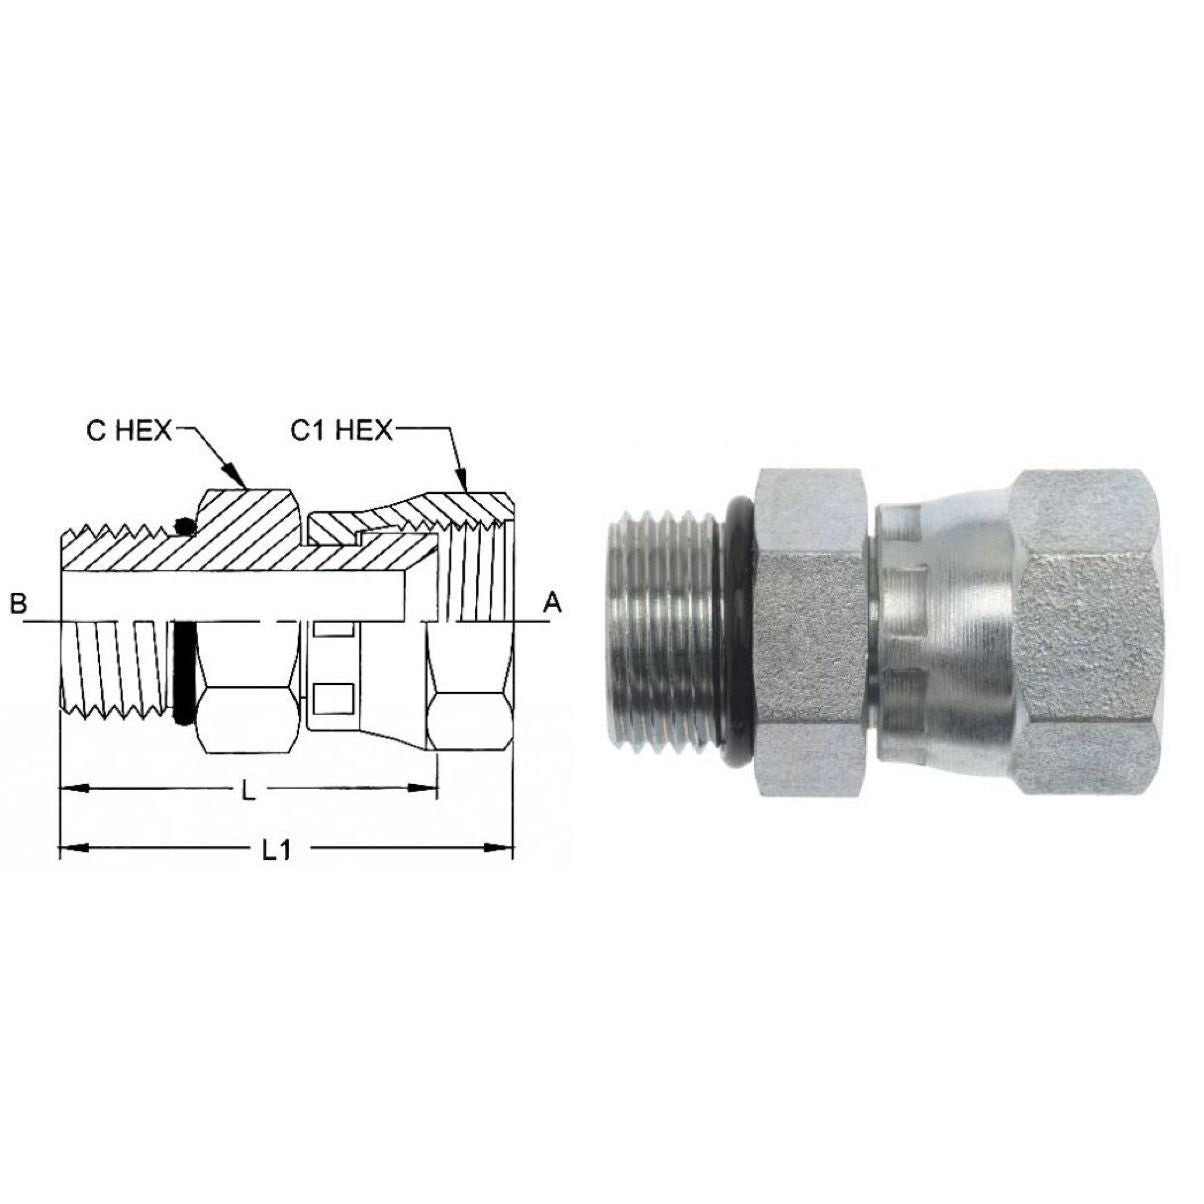 6402-08-06-O-SS : OneHydraulics Straight Adapter, 0.5 (1/2) Male ORB x 0.375 (3/8) Female JIC Swivel, Stainless Steel, 6000psi